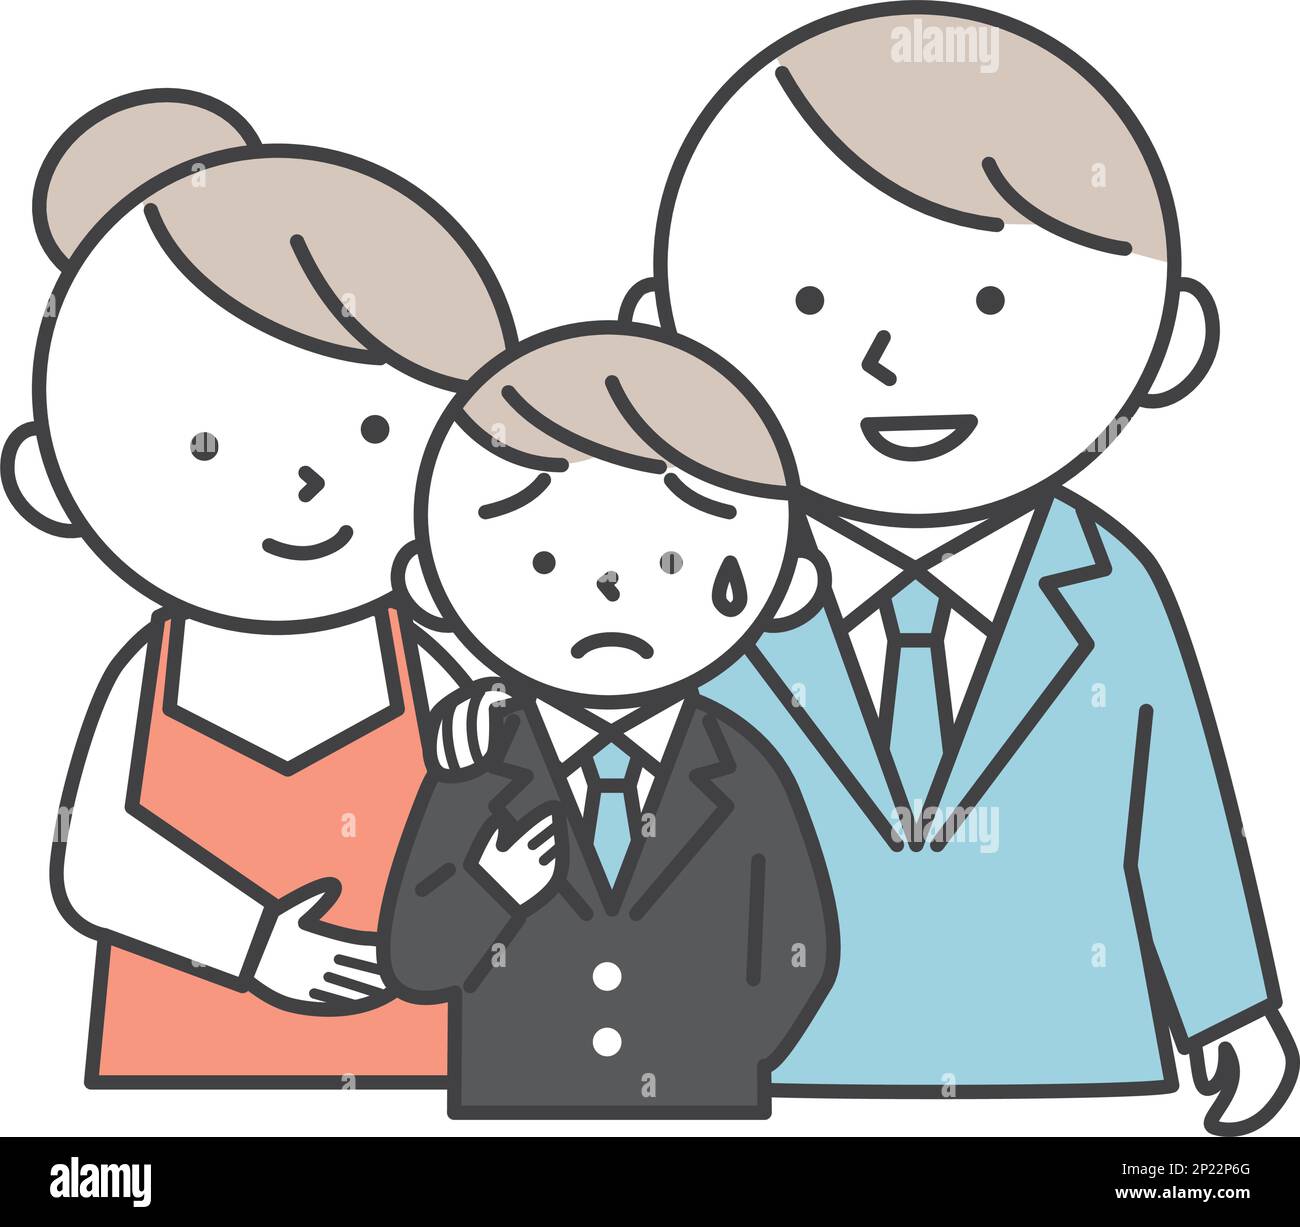 A worried male student in a blazer uniform and his parents encouraging him. Family illustration of son and parents. Simple style illustrations with ou Stock Vector